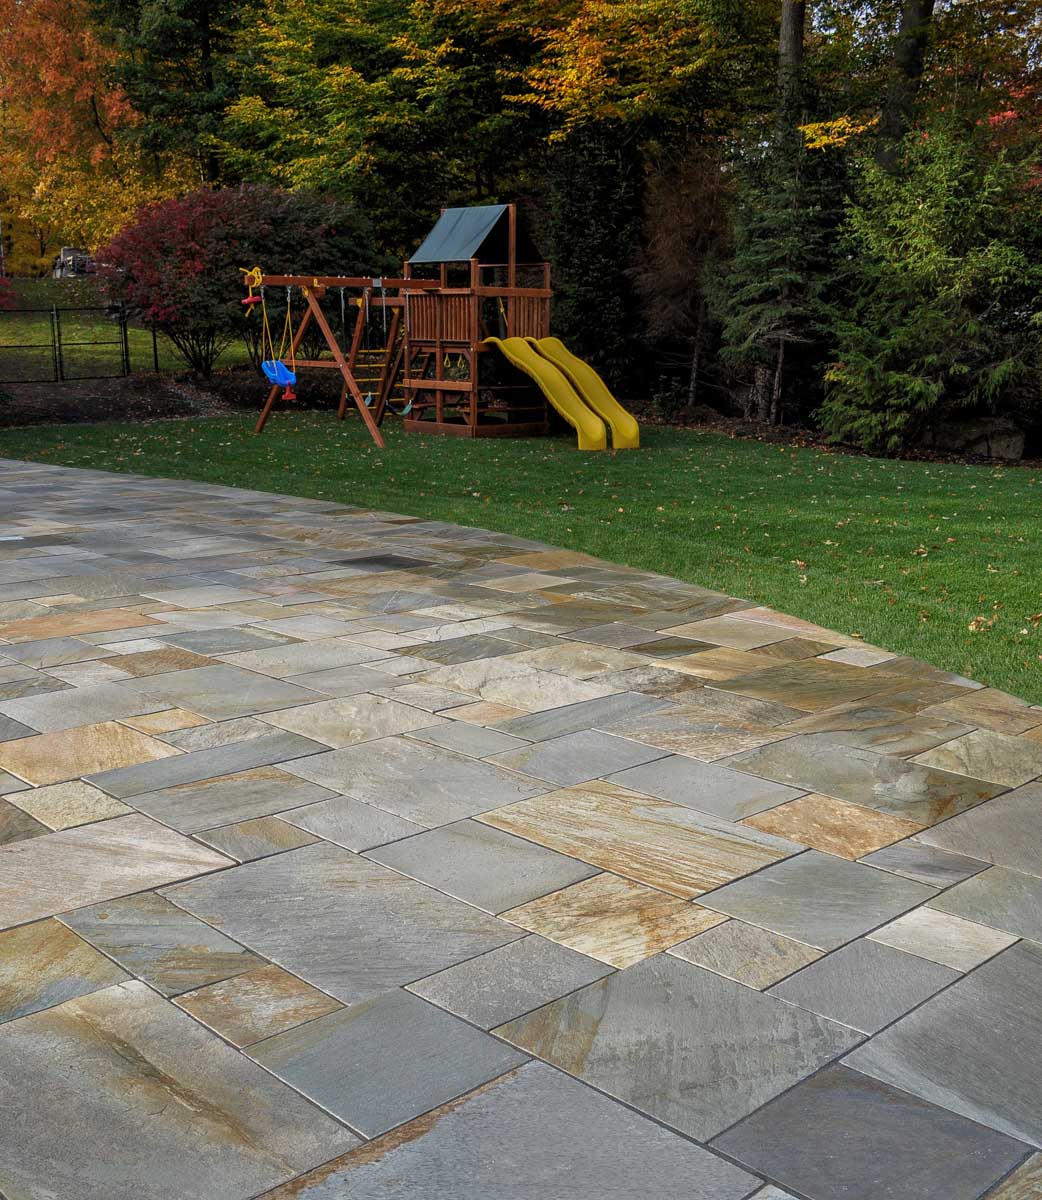 natural stone patio, lawn, swing set